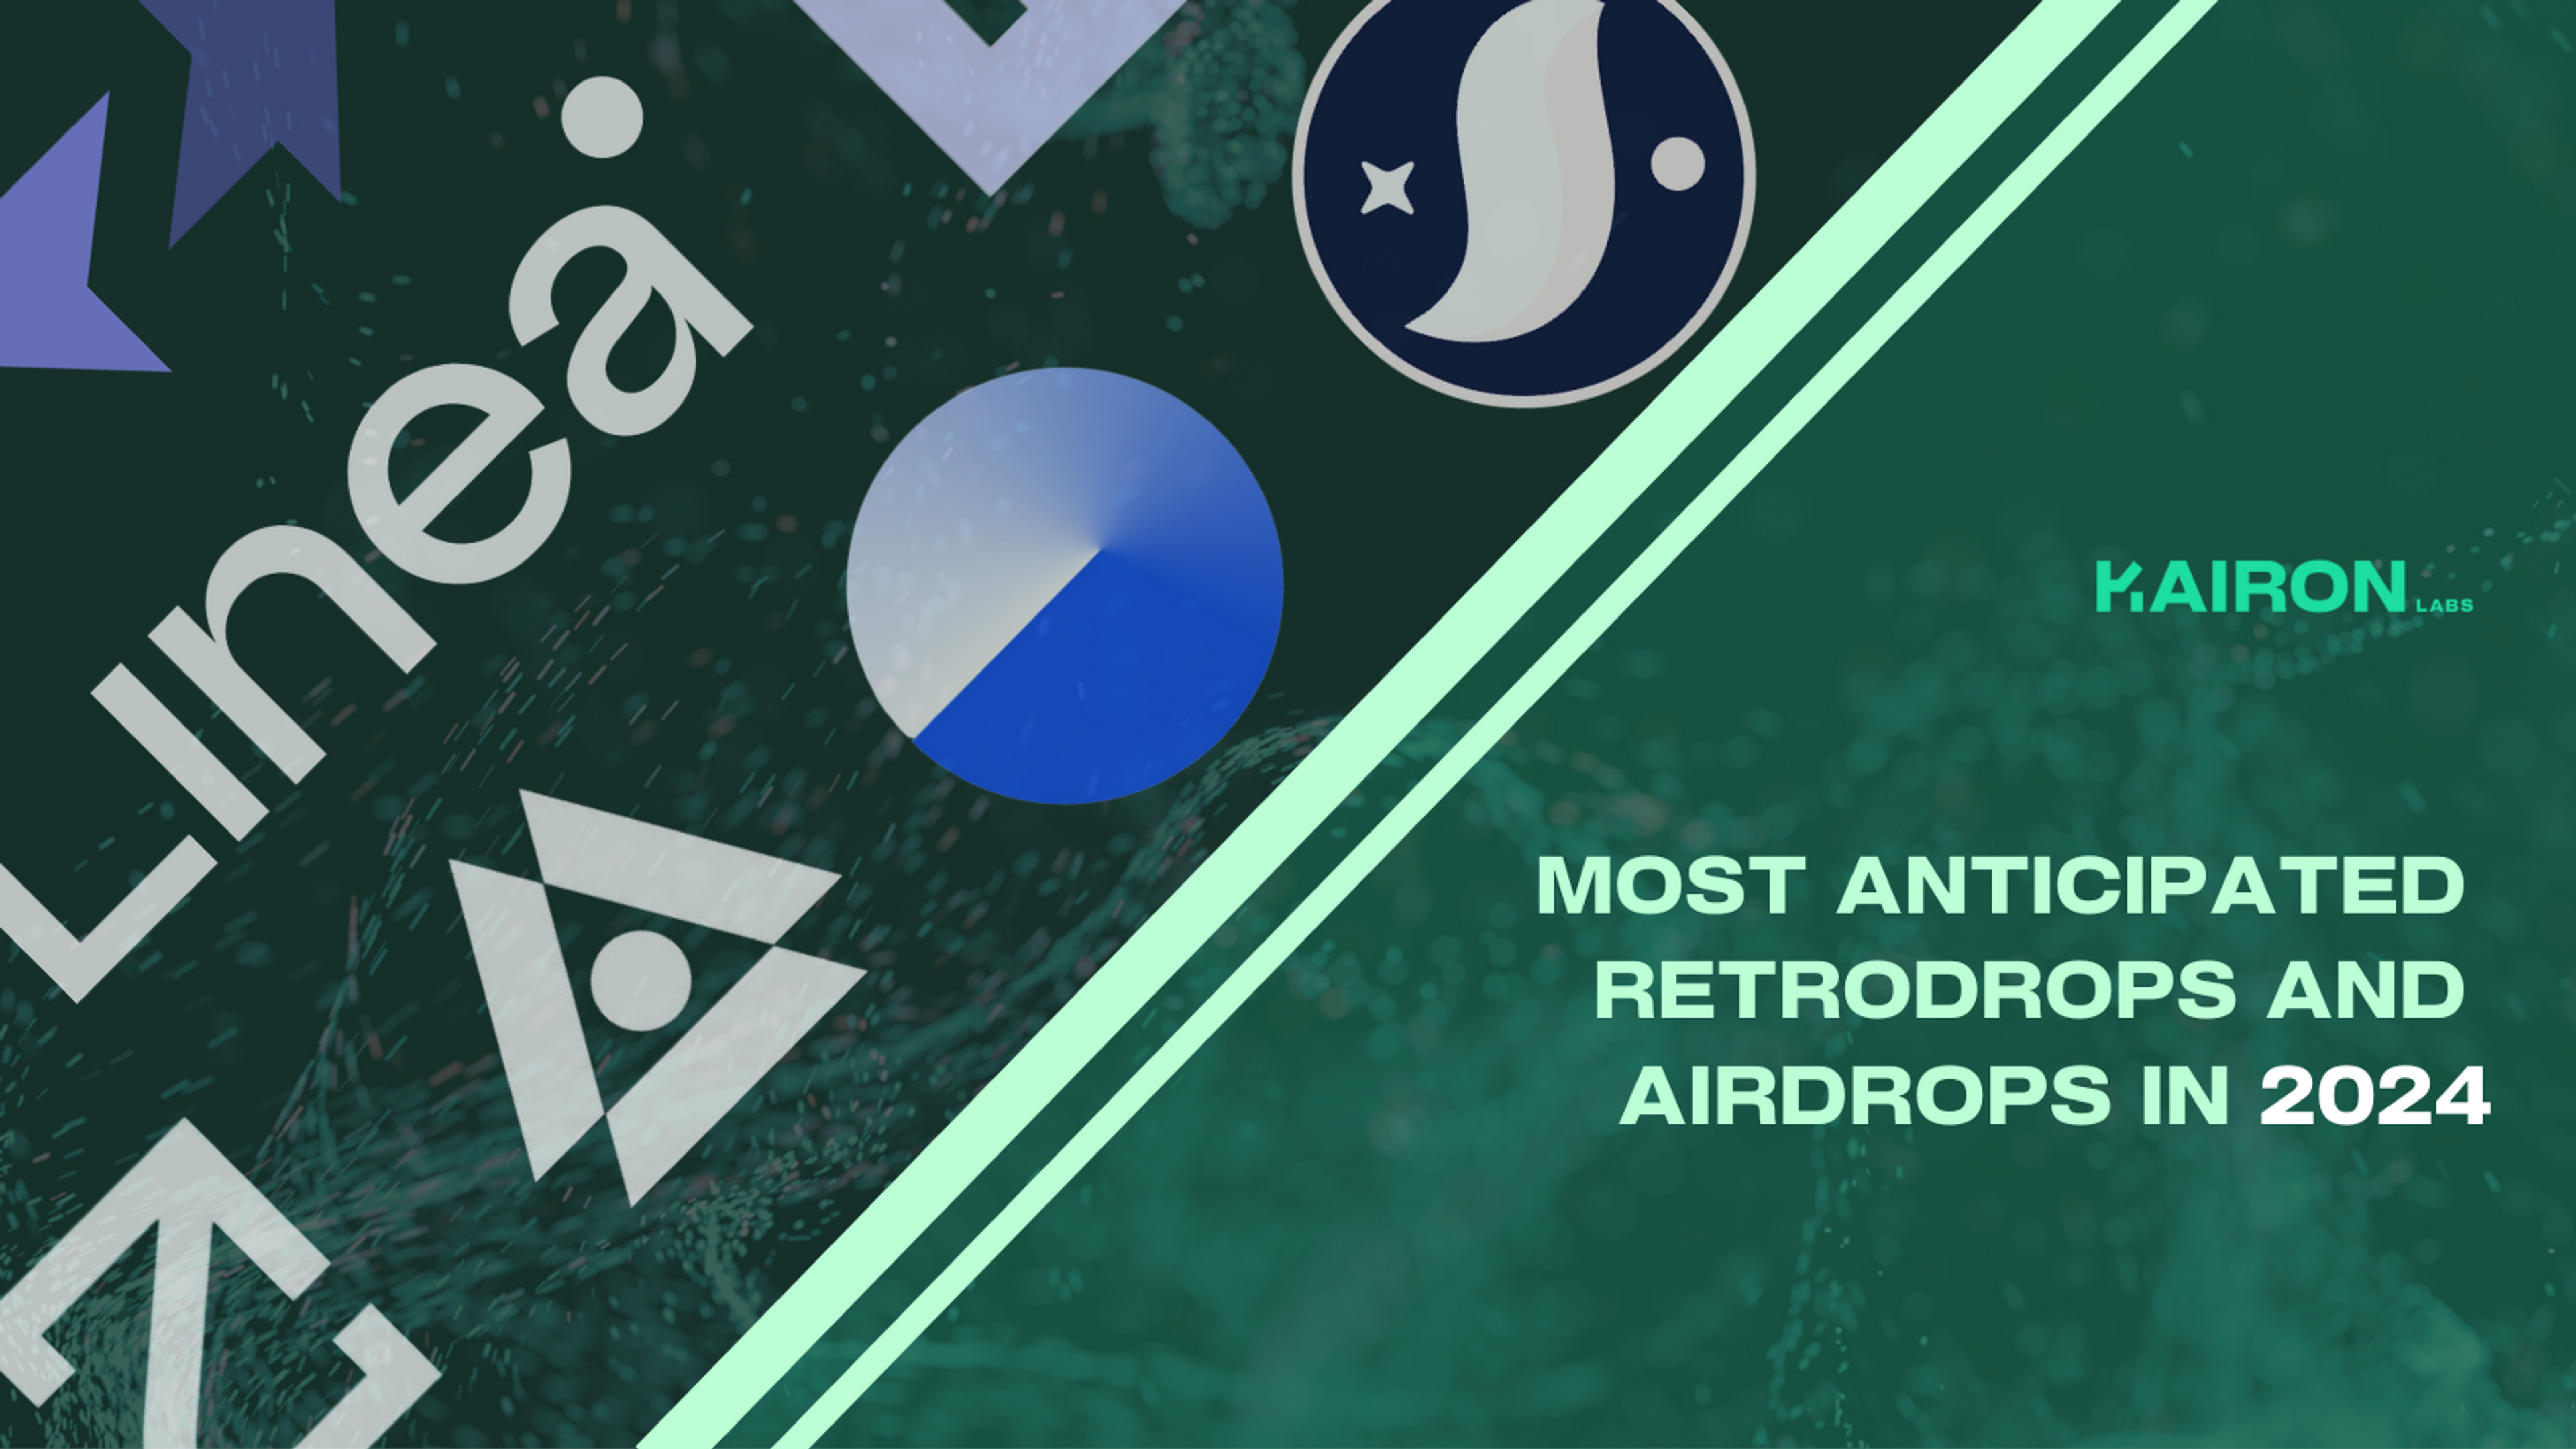 Most Anticipated Retrodrops and Airdrops in 2024